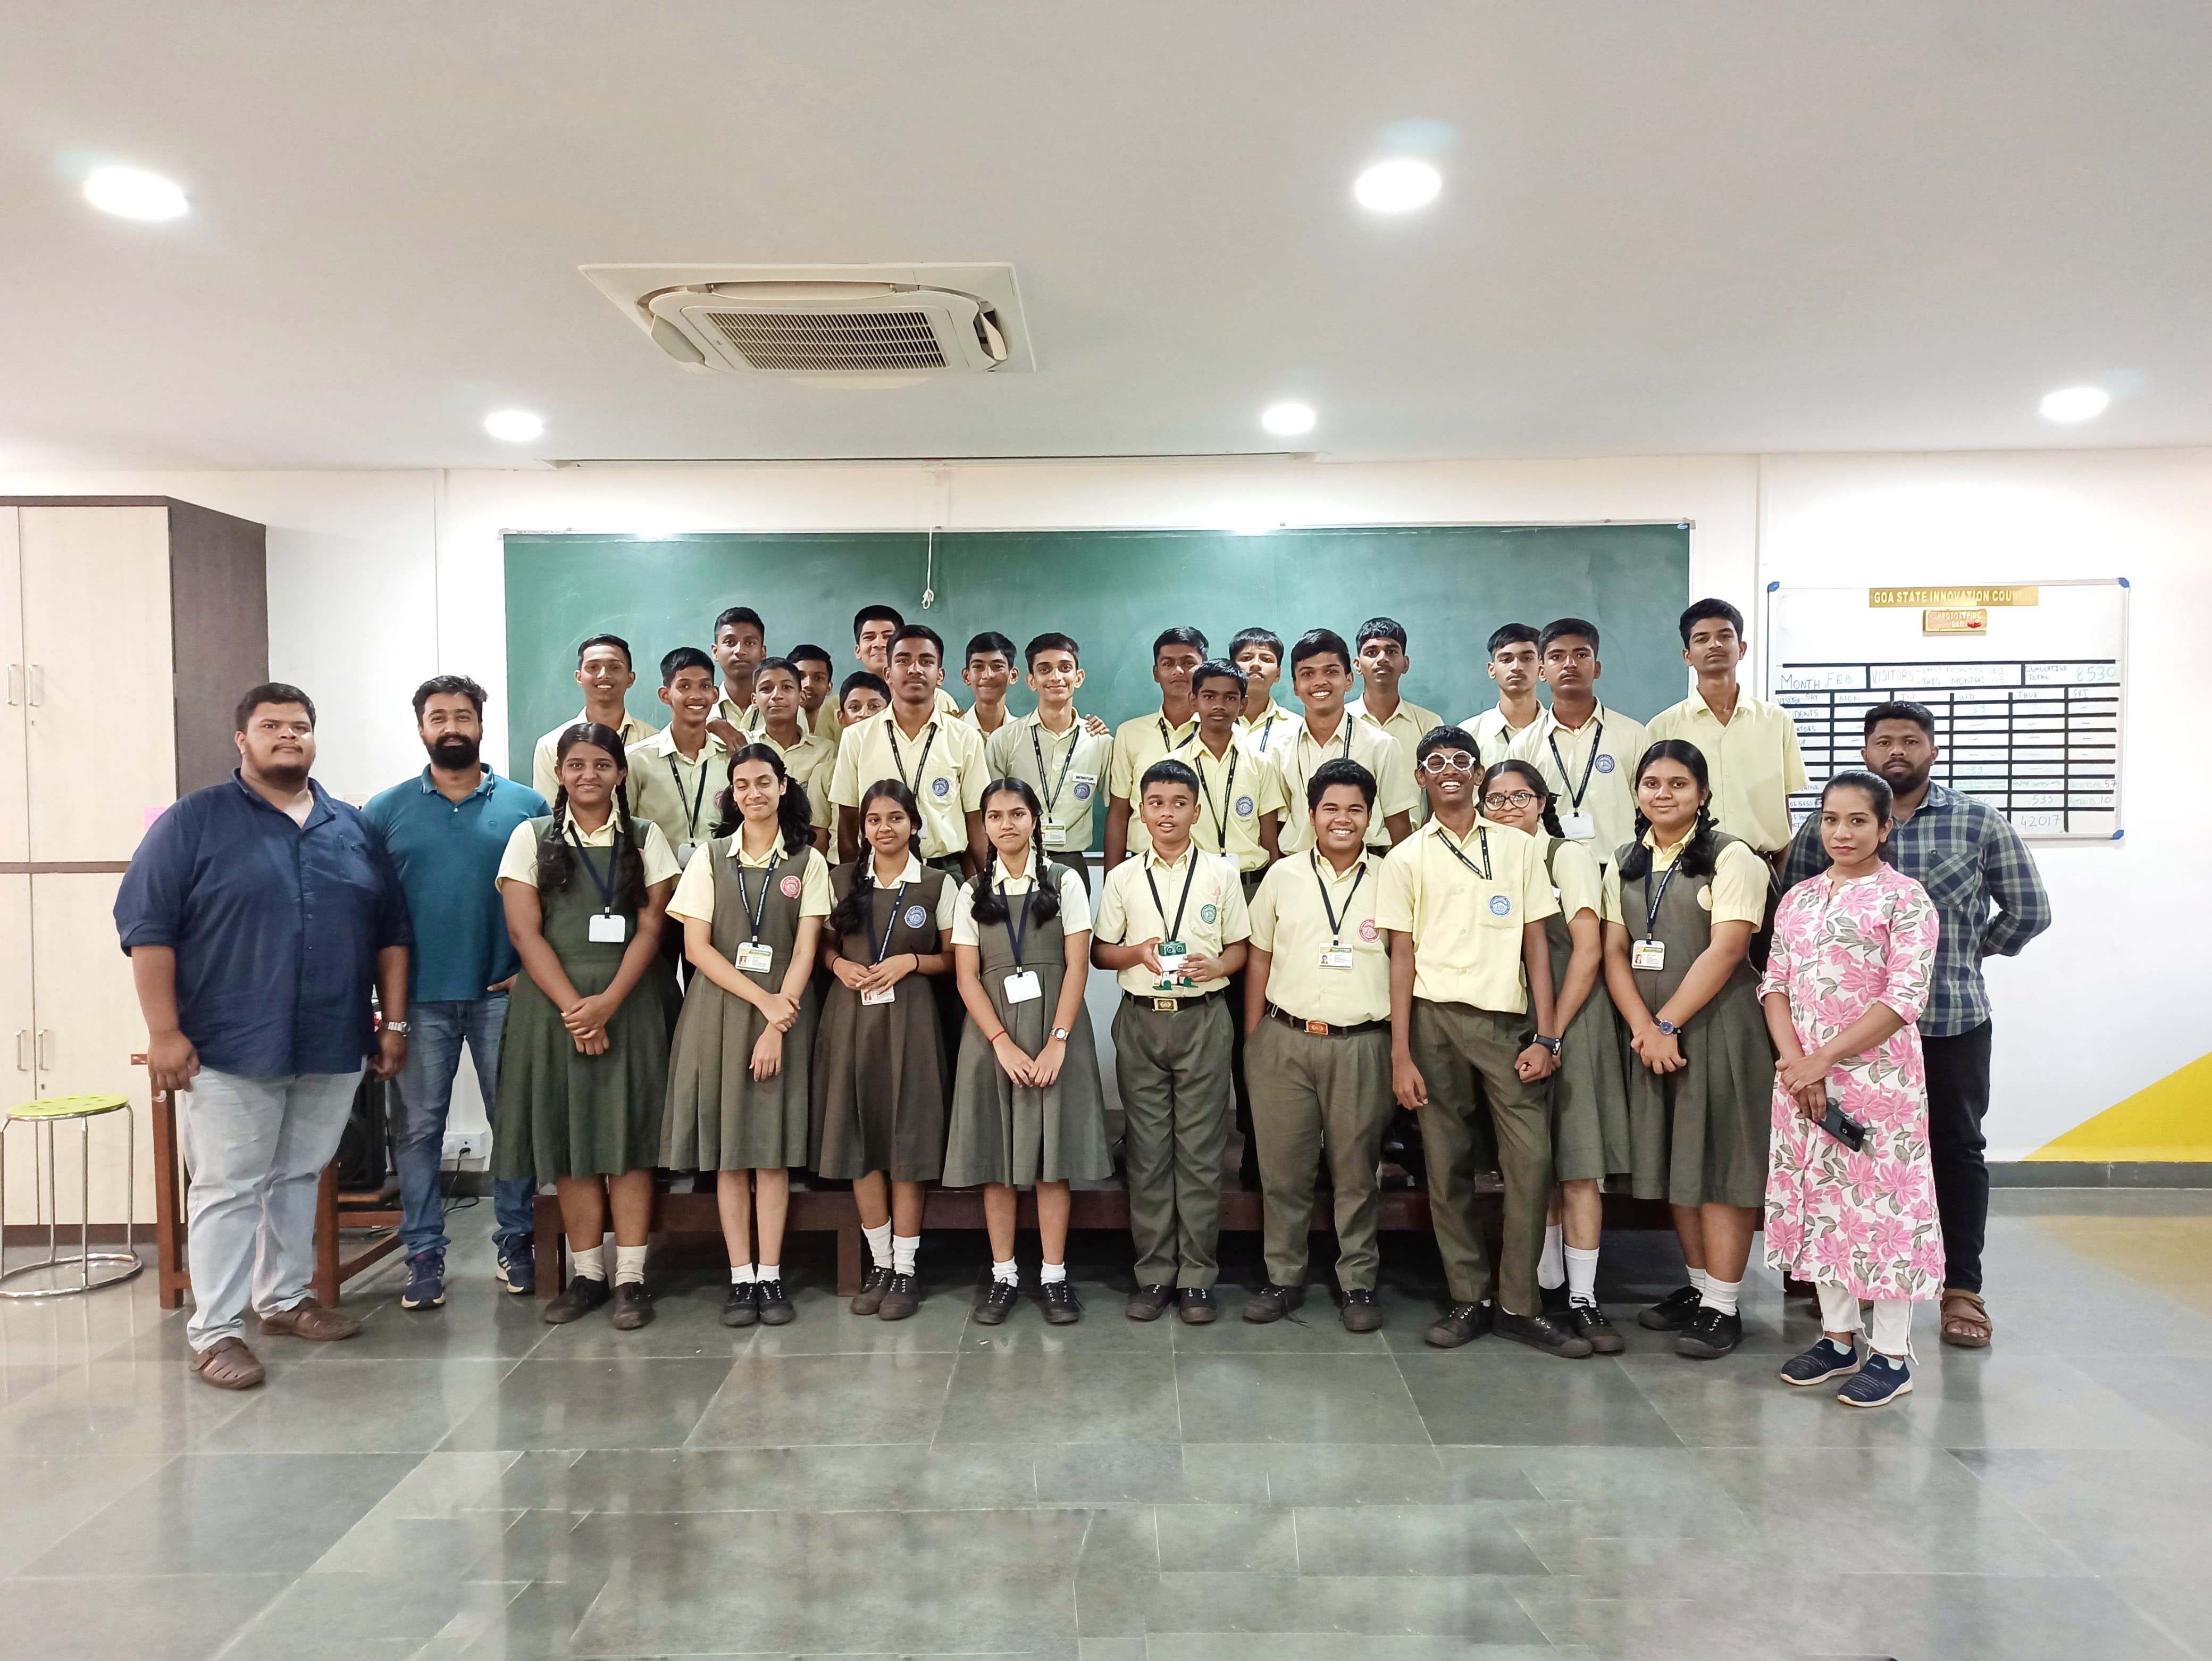 Think Design and Prototyping session and Workshop on 3D printing and Robotics for the students of Popular High School, Margao-Goa.